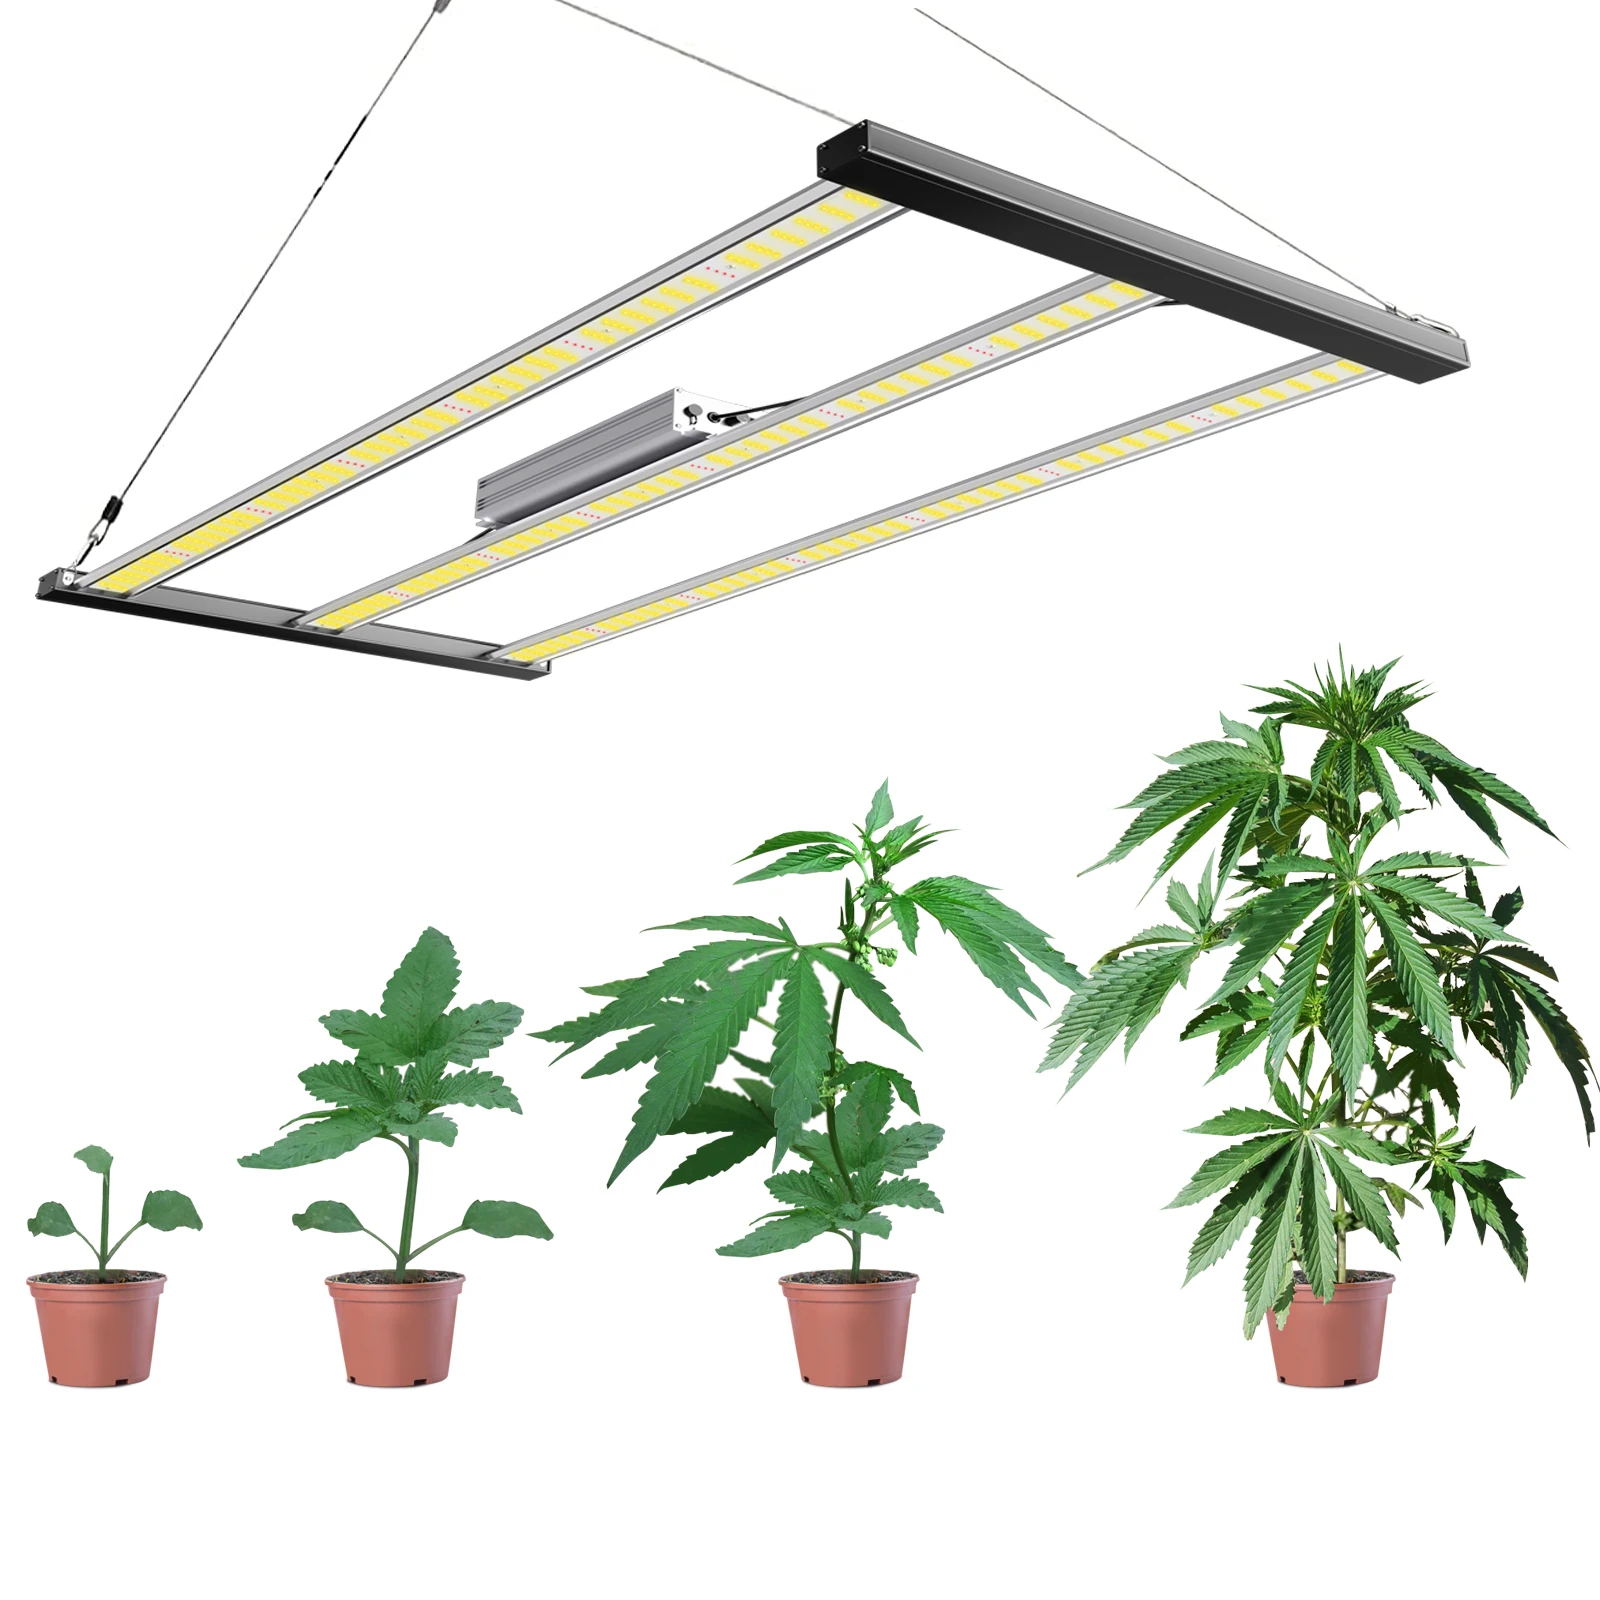 LM301B 350W Leoon Indoor Home Agriculture Lighting Dimmable 0-10V LED Plant Grow Lights with Full Spectrum